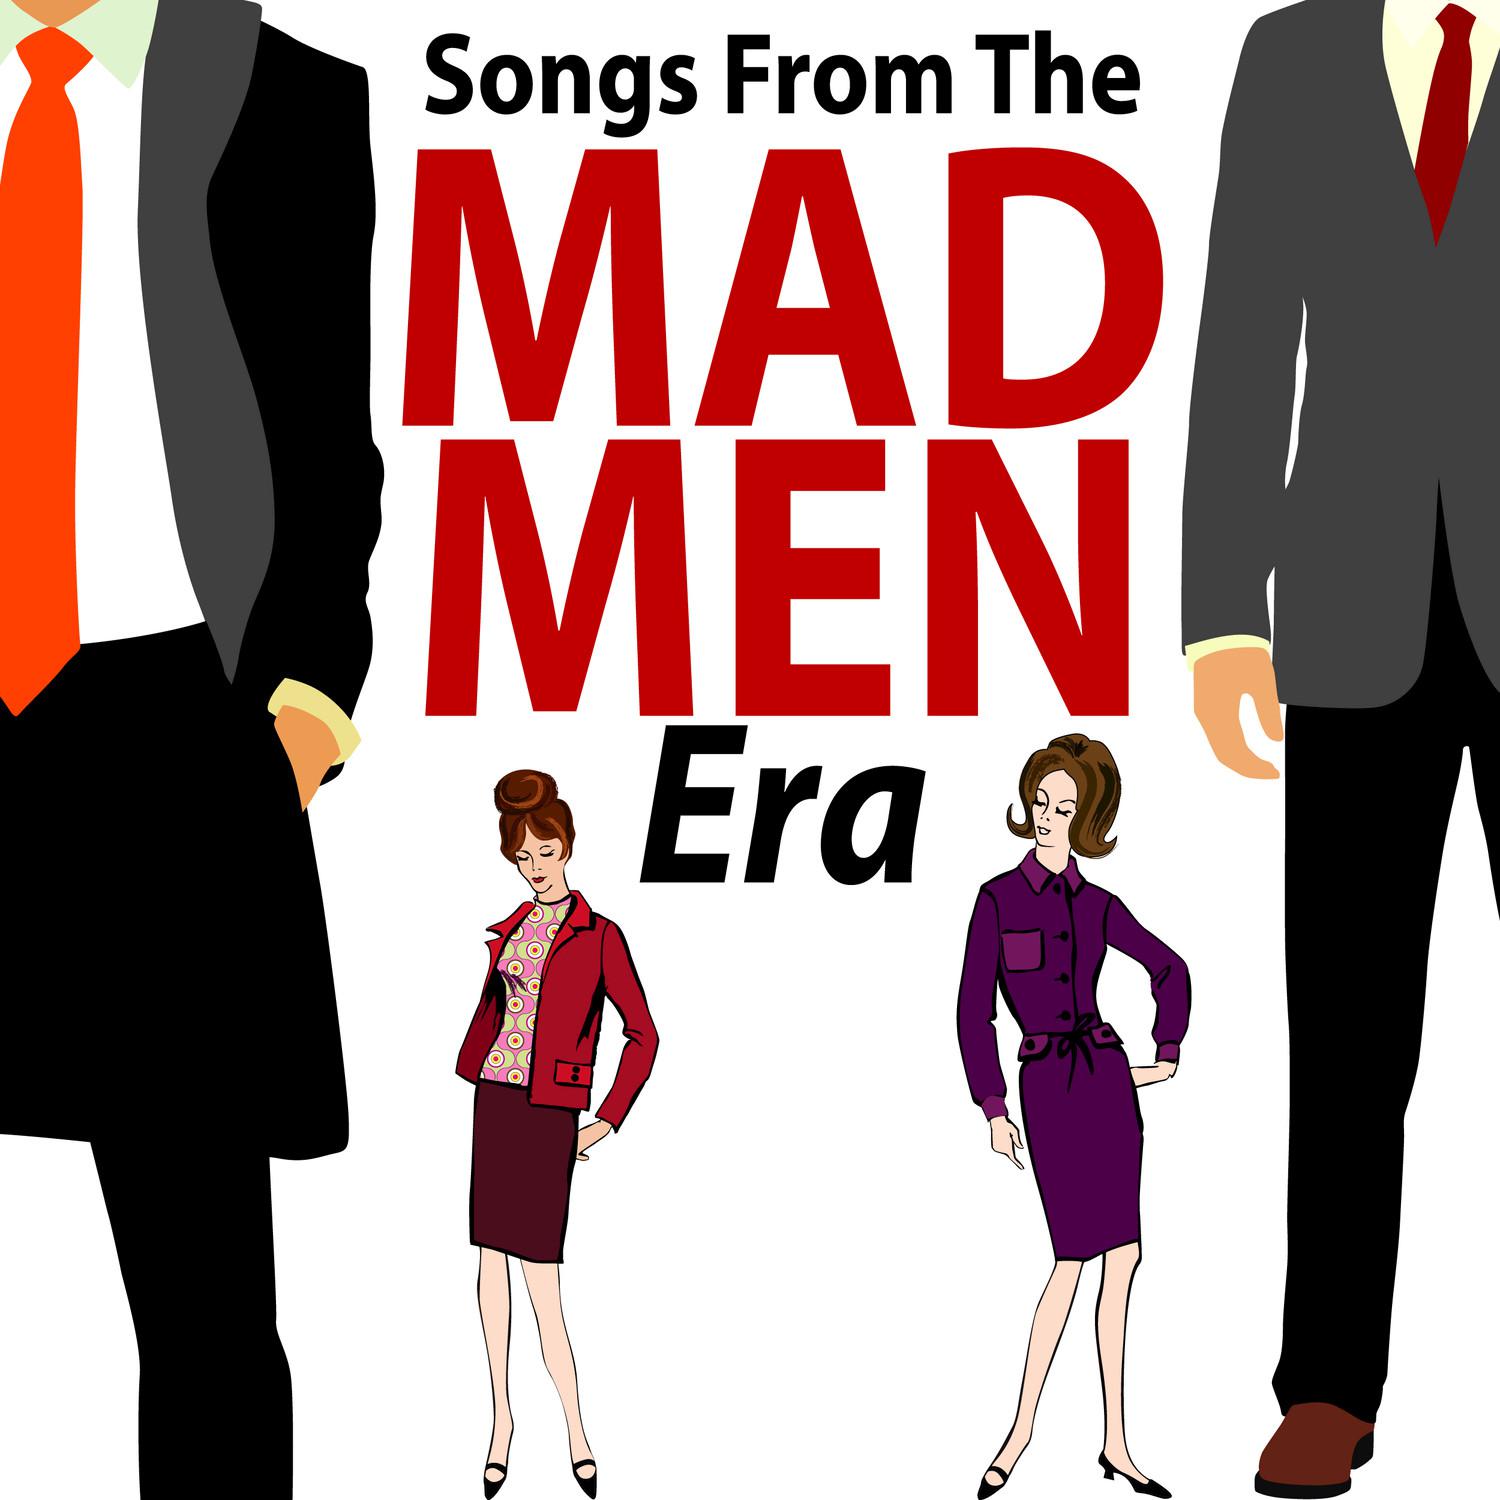 Songs from the Mad Men Era